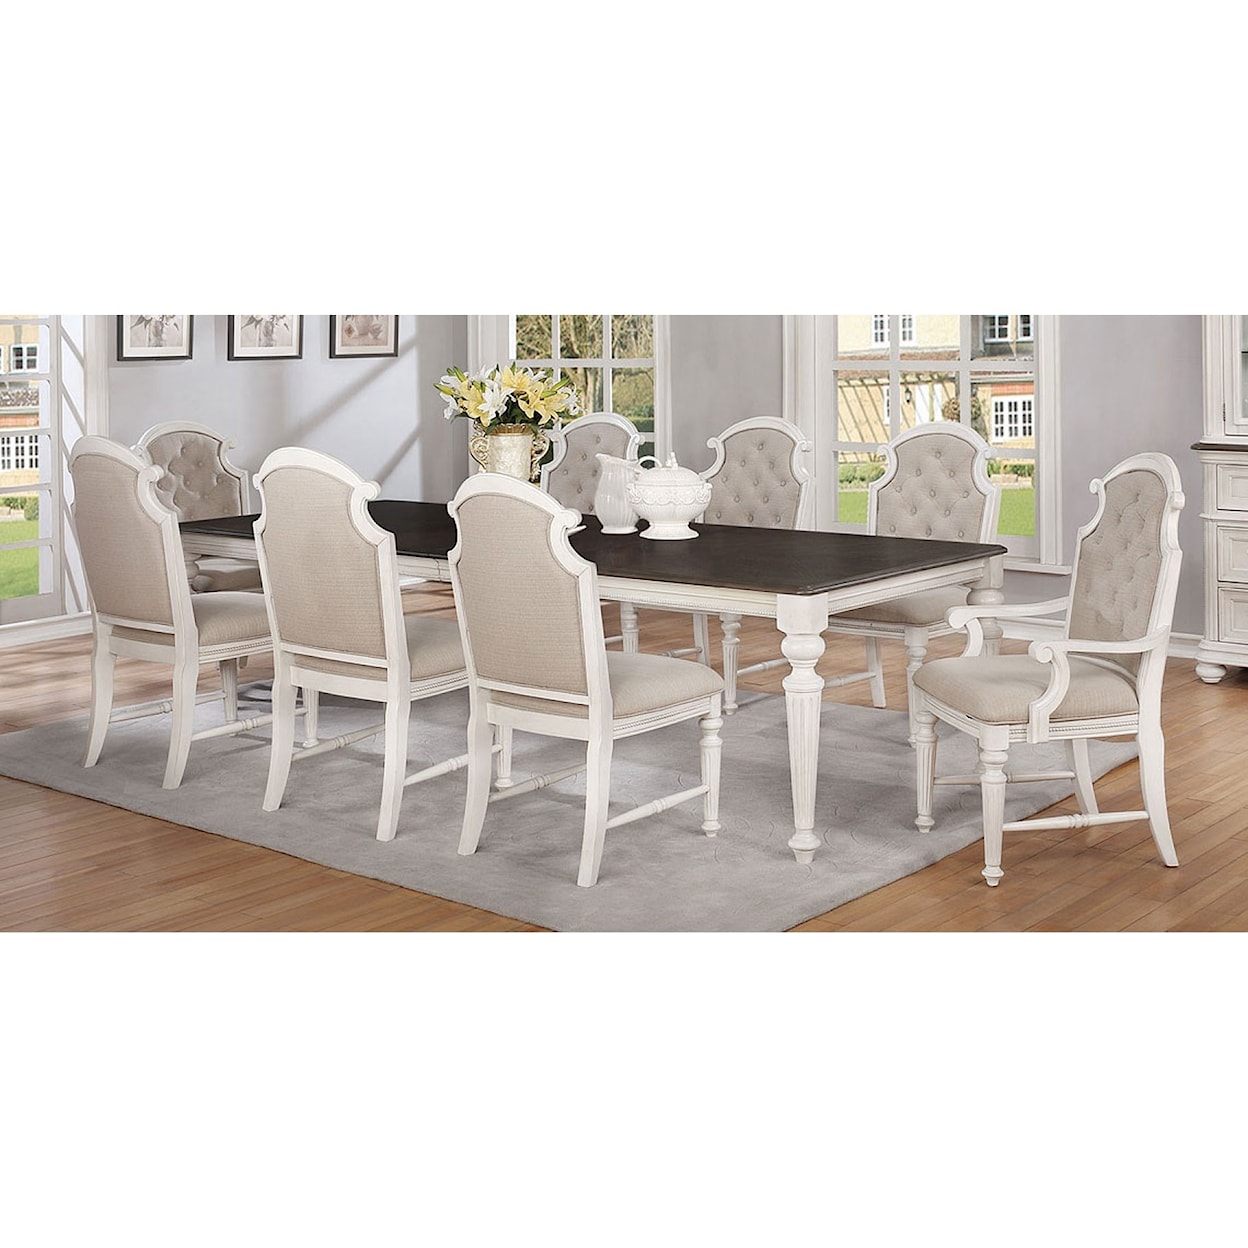 Avalon Furniture West Chester Dining Table